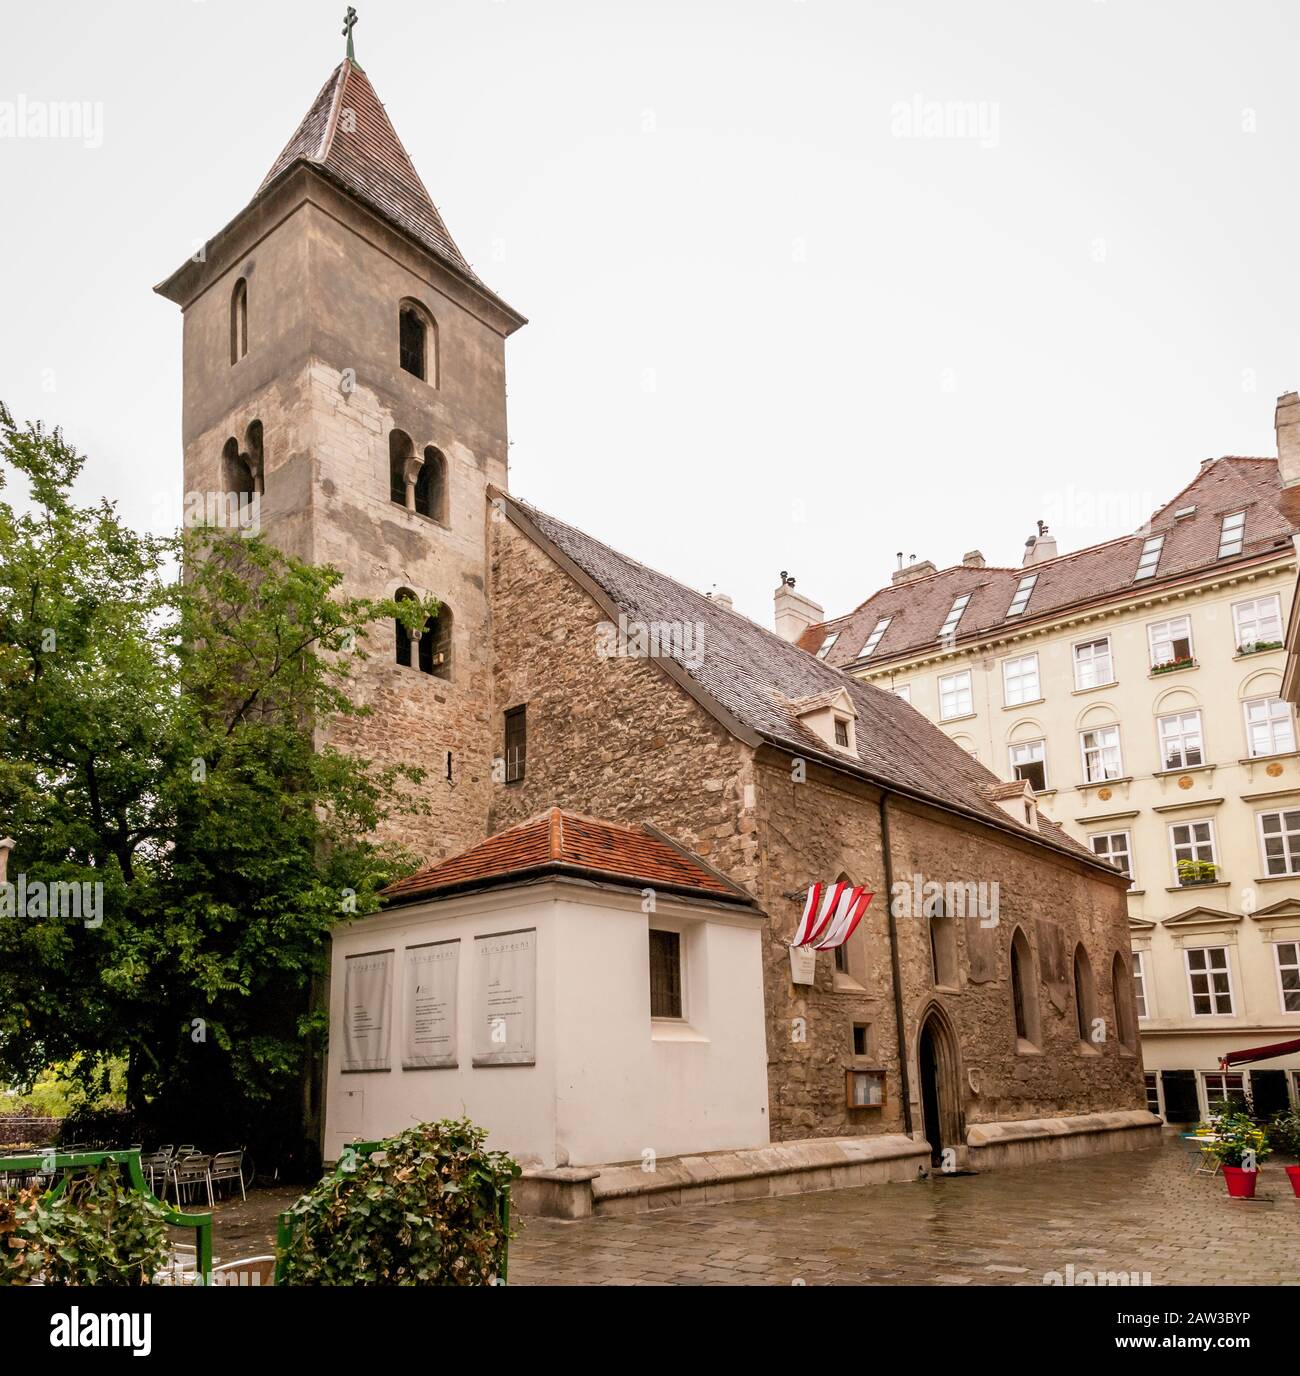 The medieval Ruprechtskirche (St. Rupert's Church) with old tree on the small yard is one of the oldest churches in Vienna, located on Ruprechtsplatz Stock Photo